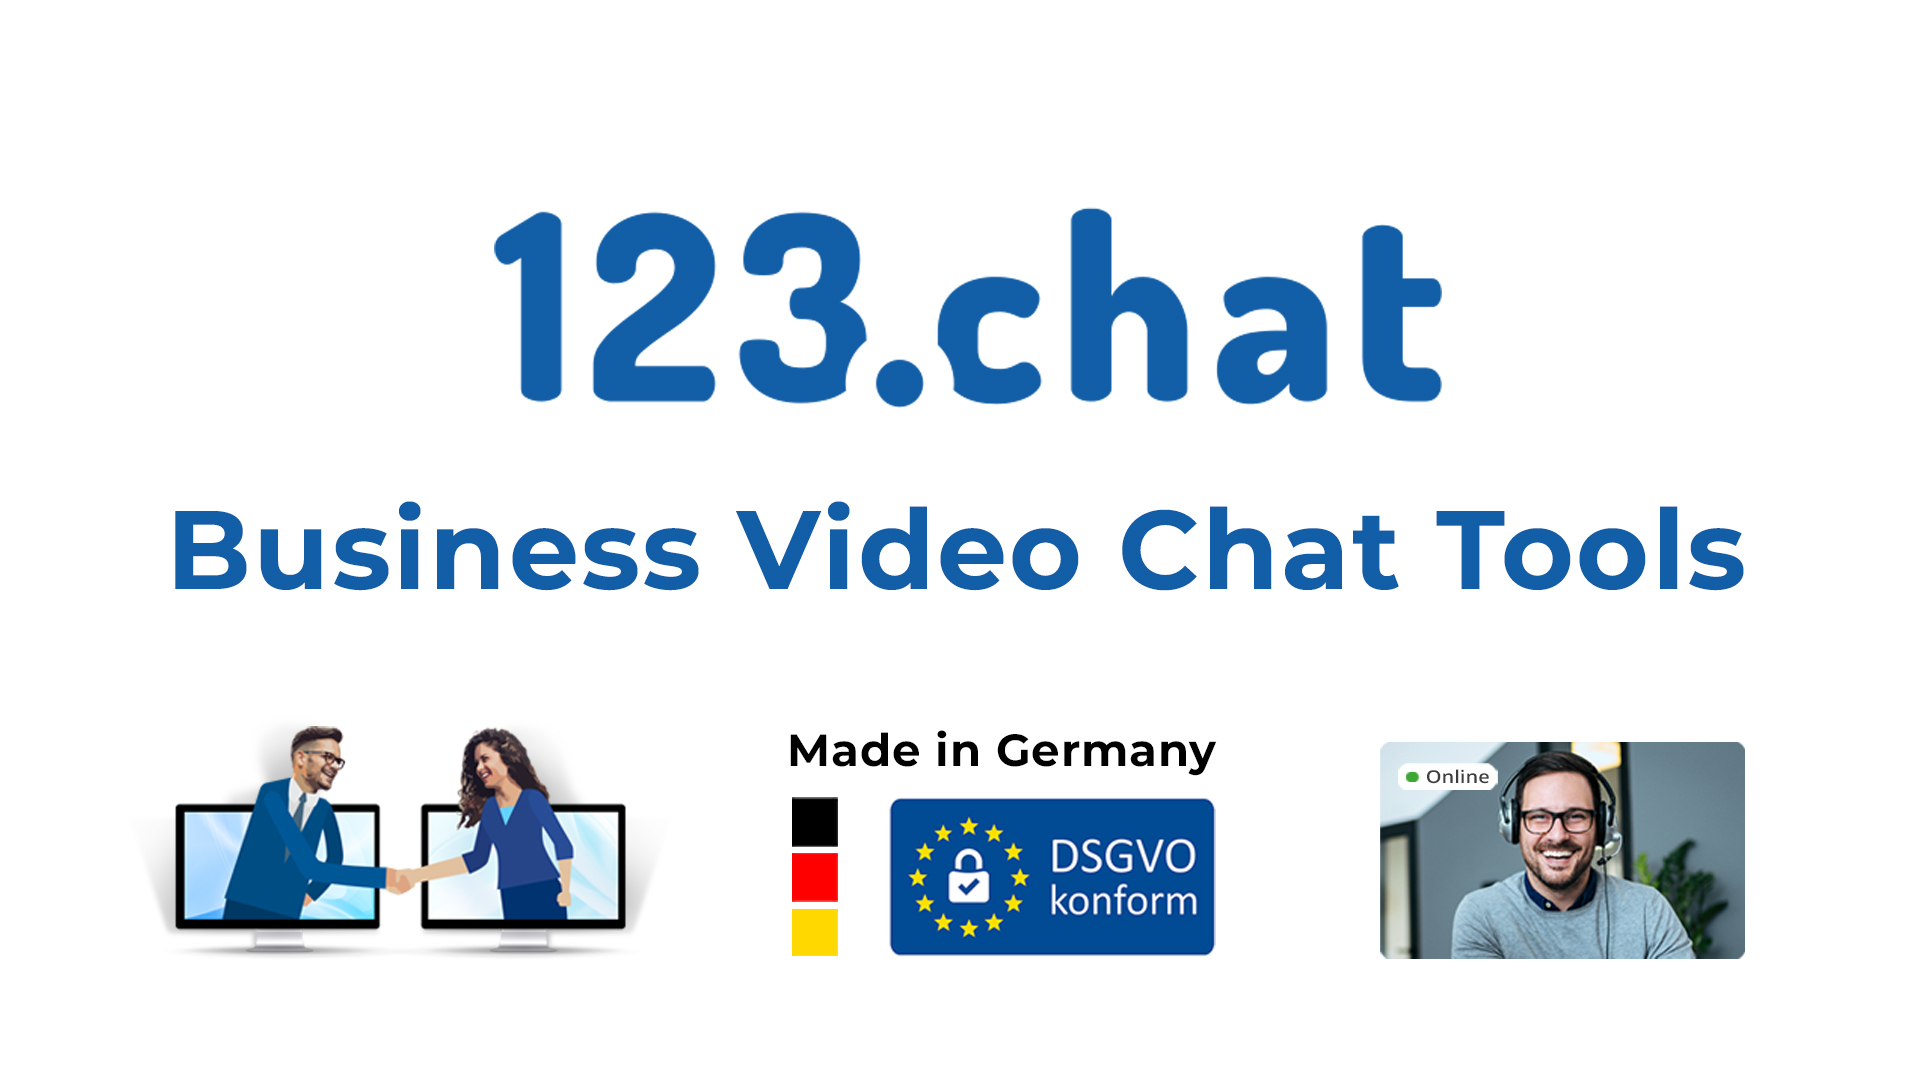 GDPR/DSGVO secure Video Chat